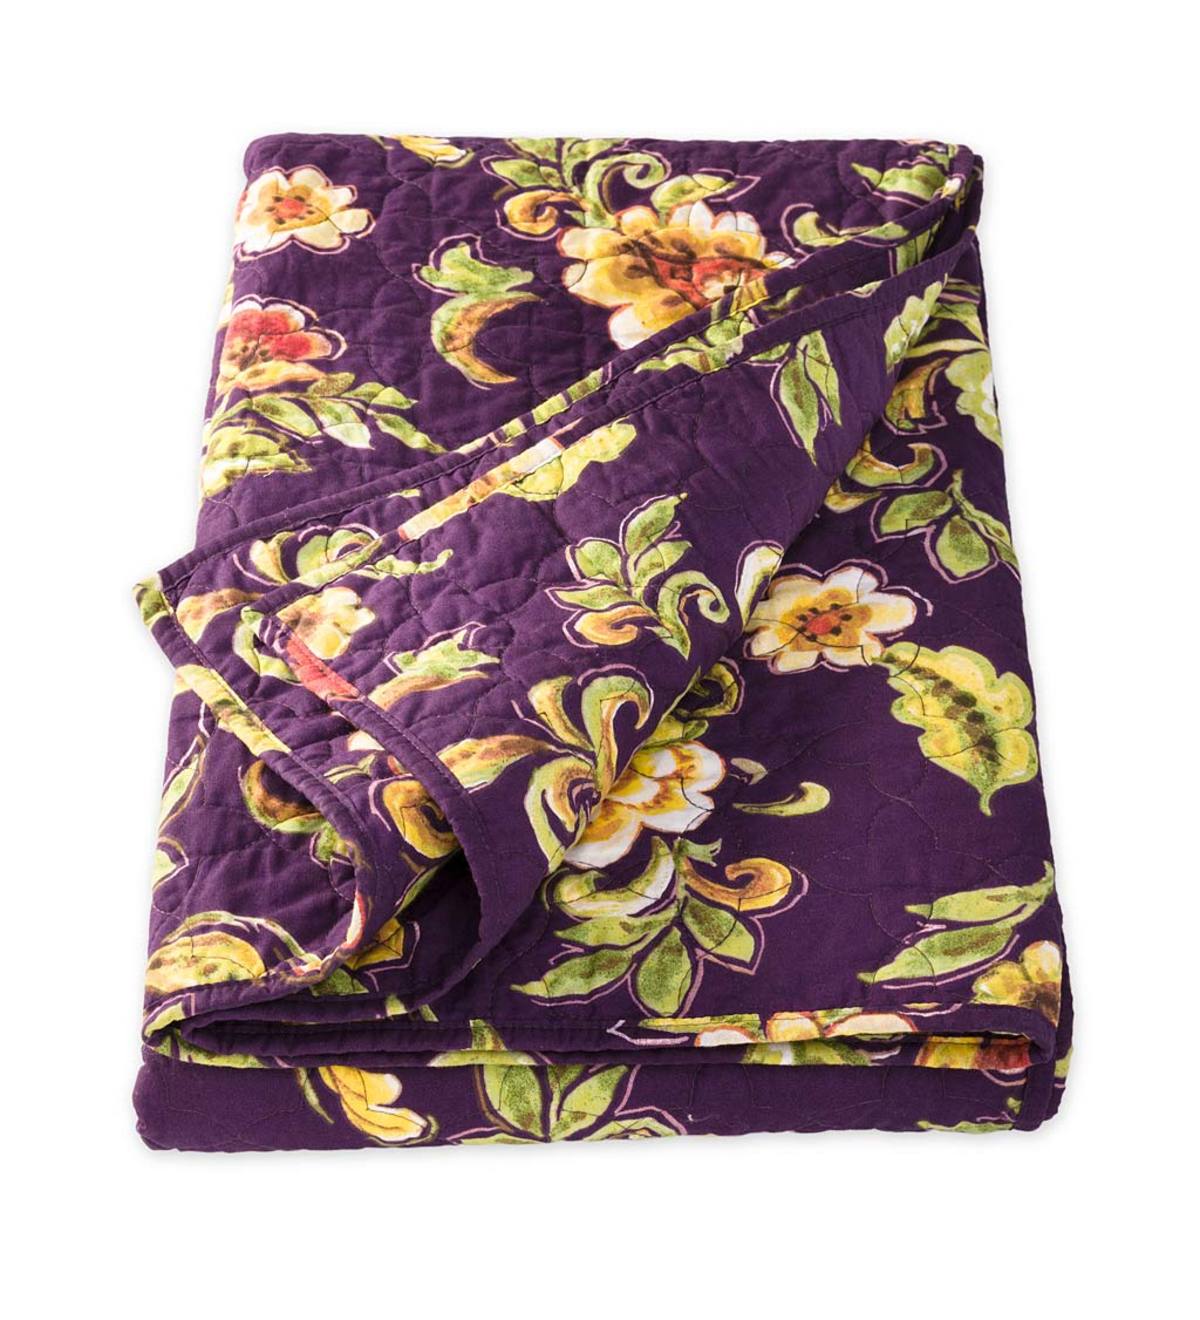 Delilah Floral Reversible Cotton Quilted Throw